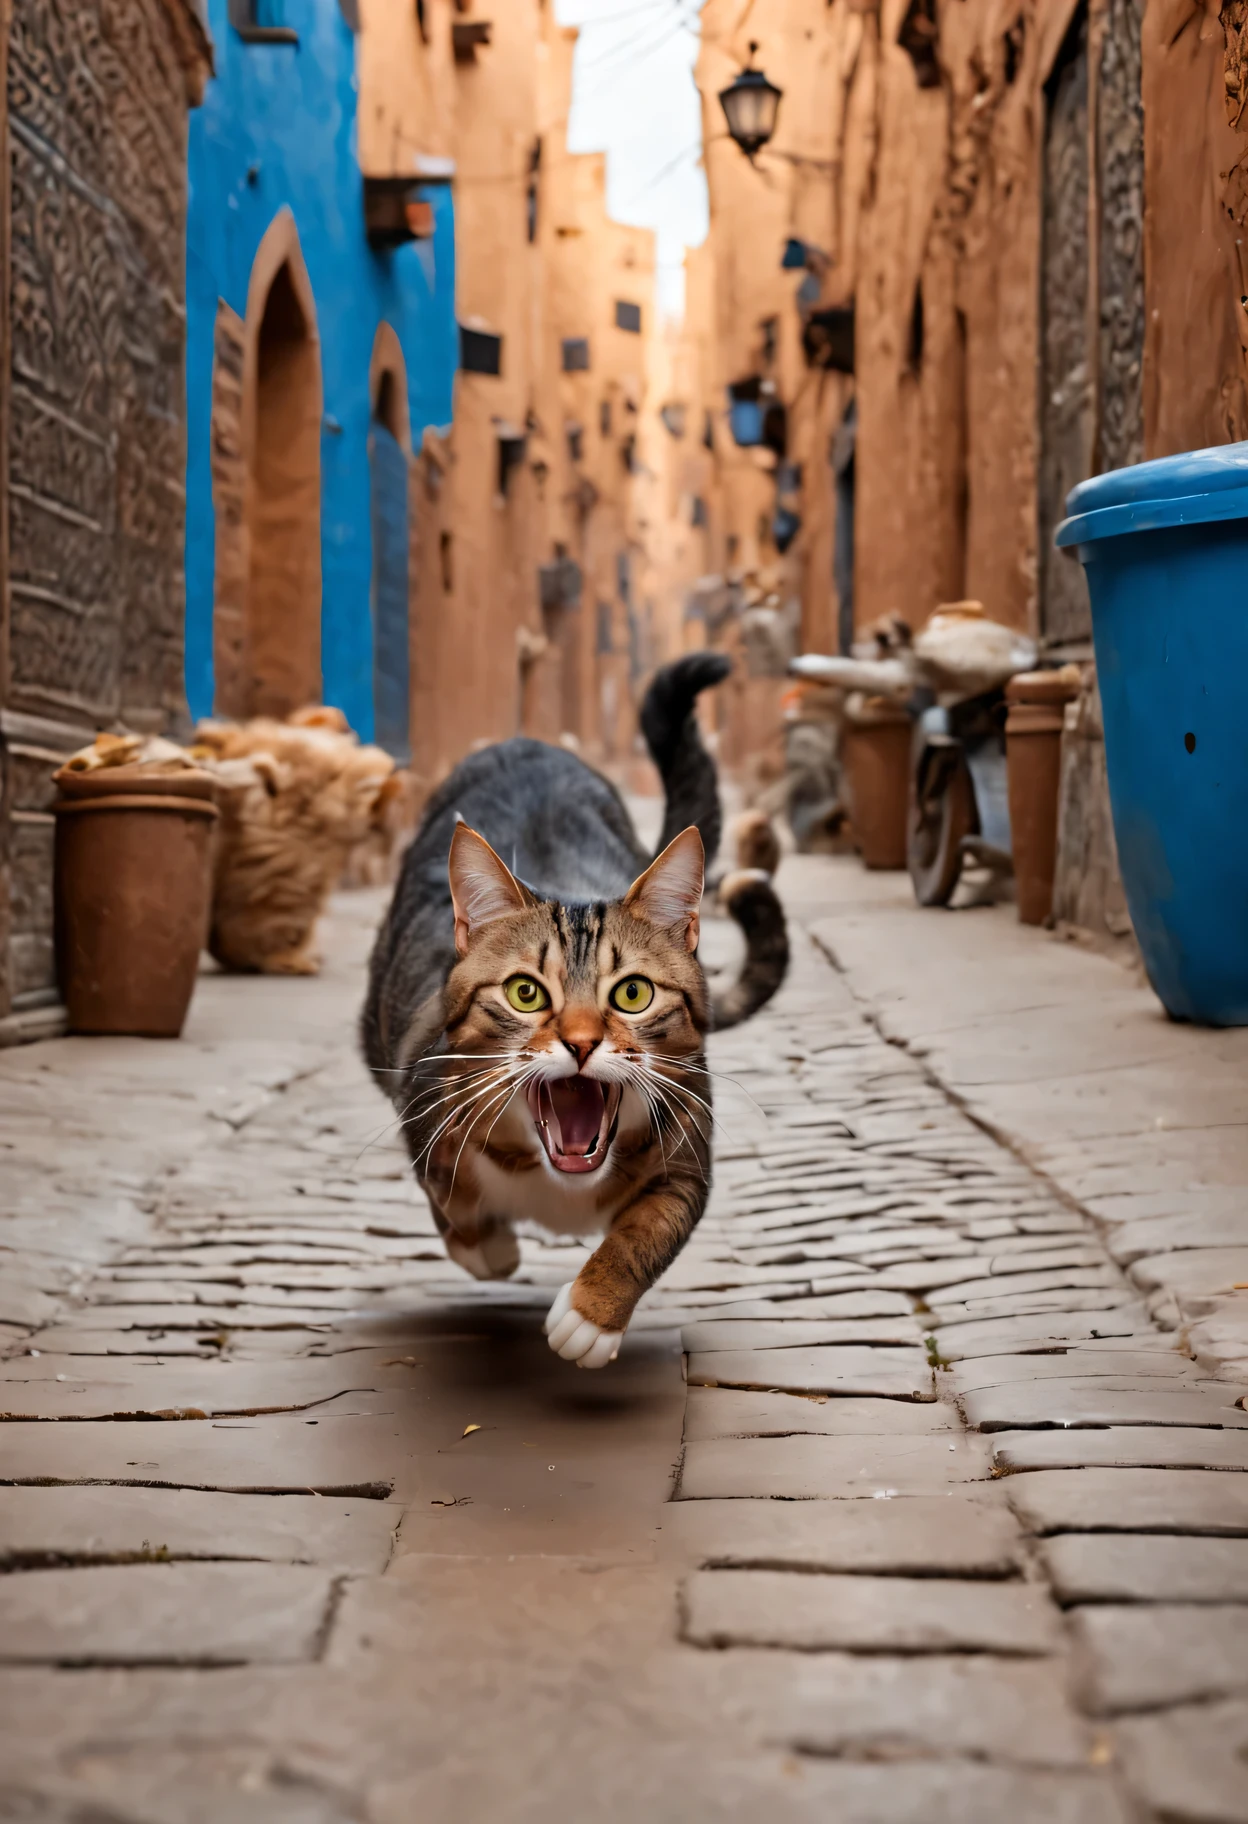 there is a 猫 that is running down the street with Moroccan people chasing it, awesome 猫, 極為真實的照片, 現實生活中的湯姆與傑瑞, happy 猫, 猫 attacking Marrakech, funny 猫, running 猫, !!! 猫!!!, !!!! 猫!!!!, 高度真實的照片, 现实生活图片, 超寫實的畫面, 超真實照片, 嘴里塞着偷来的沙丁鱼, 超寫實的畫面